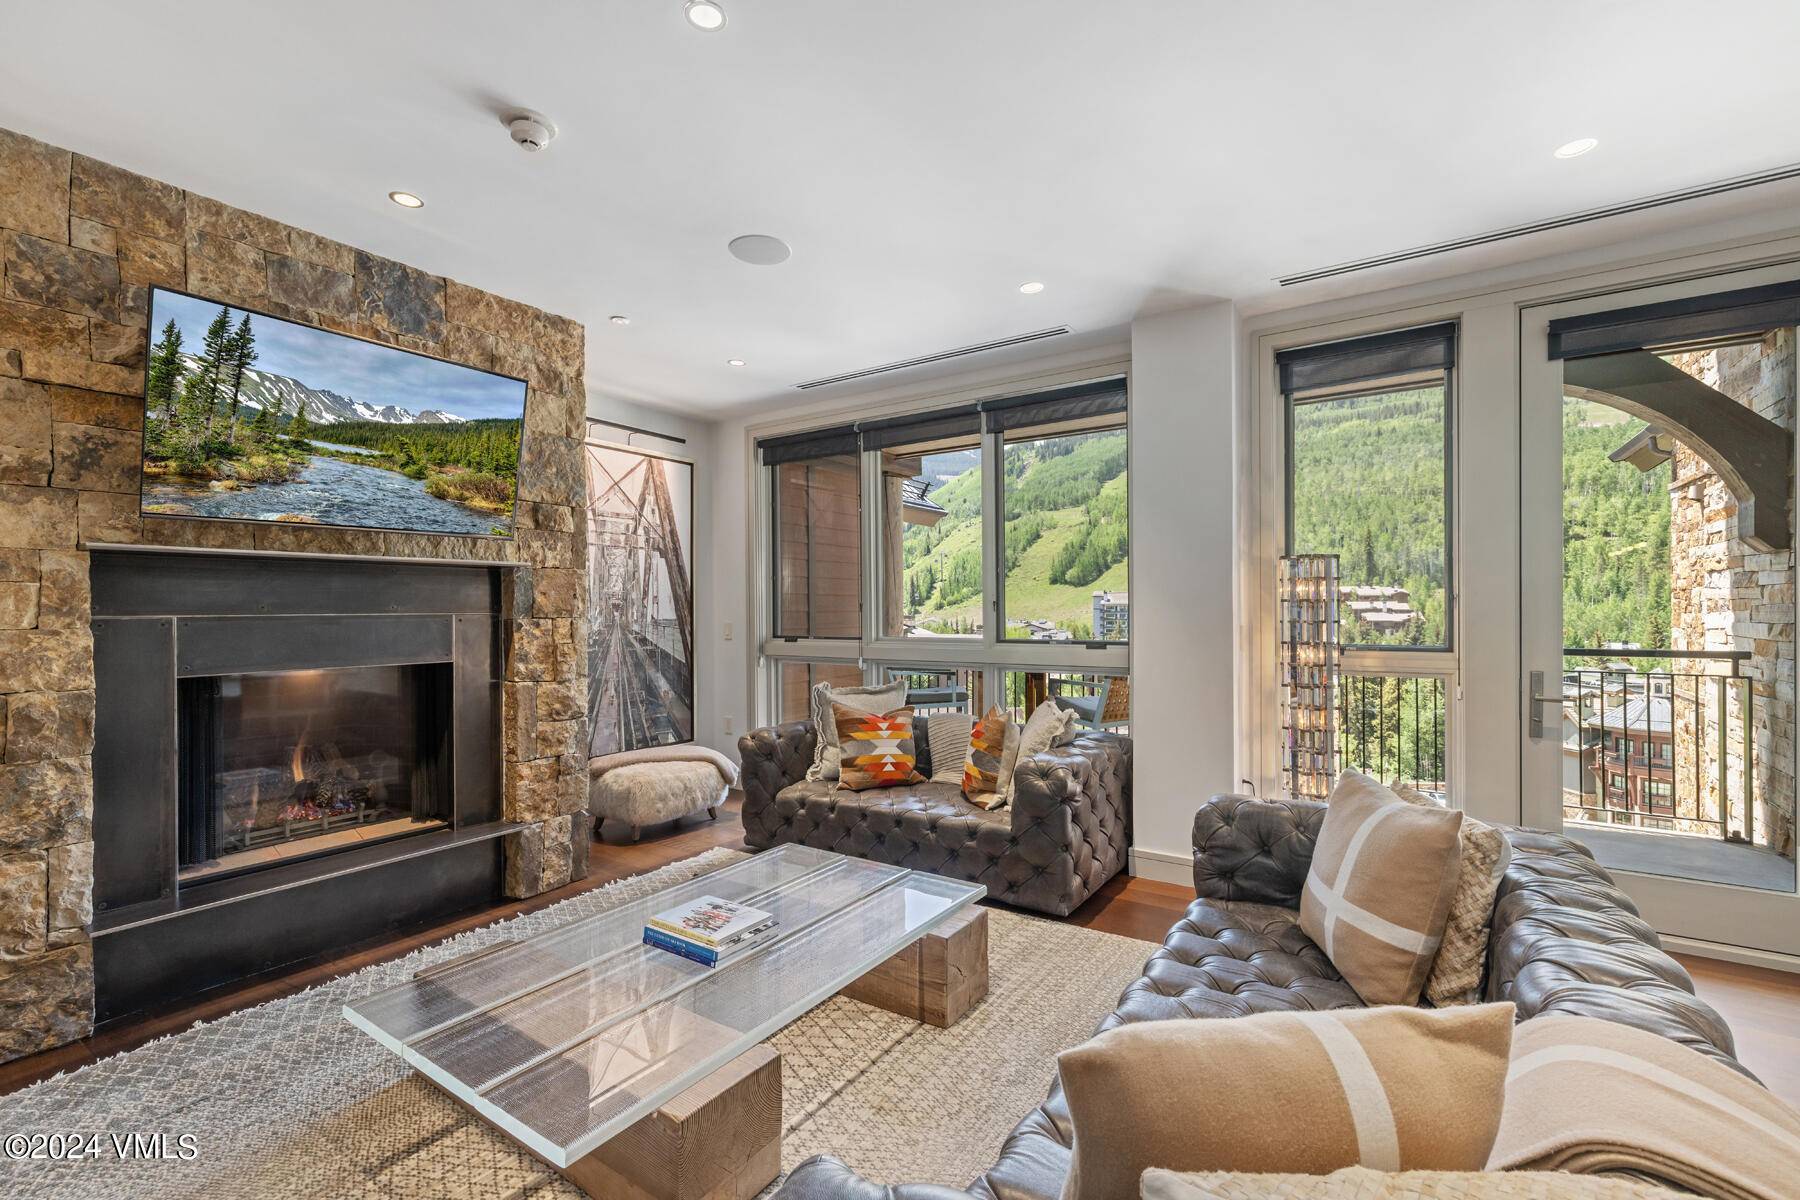 Beautifully remodeled and tastefully appointed in a modern and sophisticated style, this 4 bedroom residence also includes a large den and has direct south facing ski slope views towards Vail ...